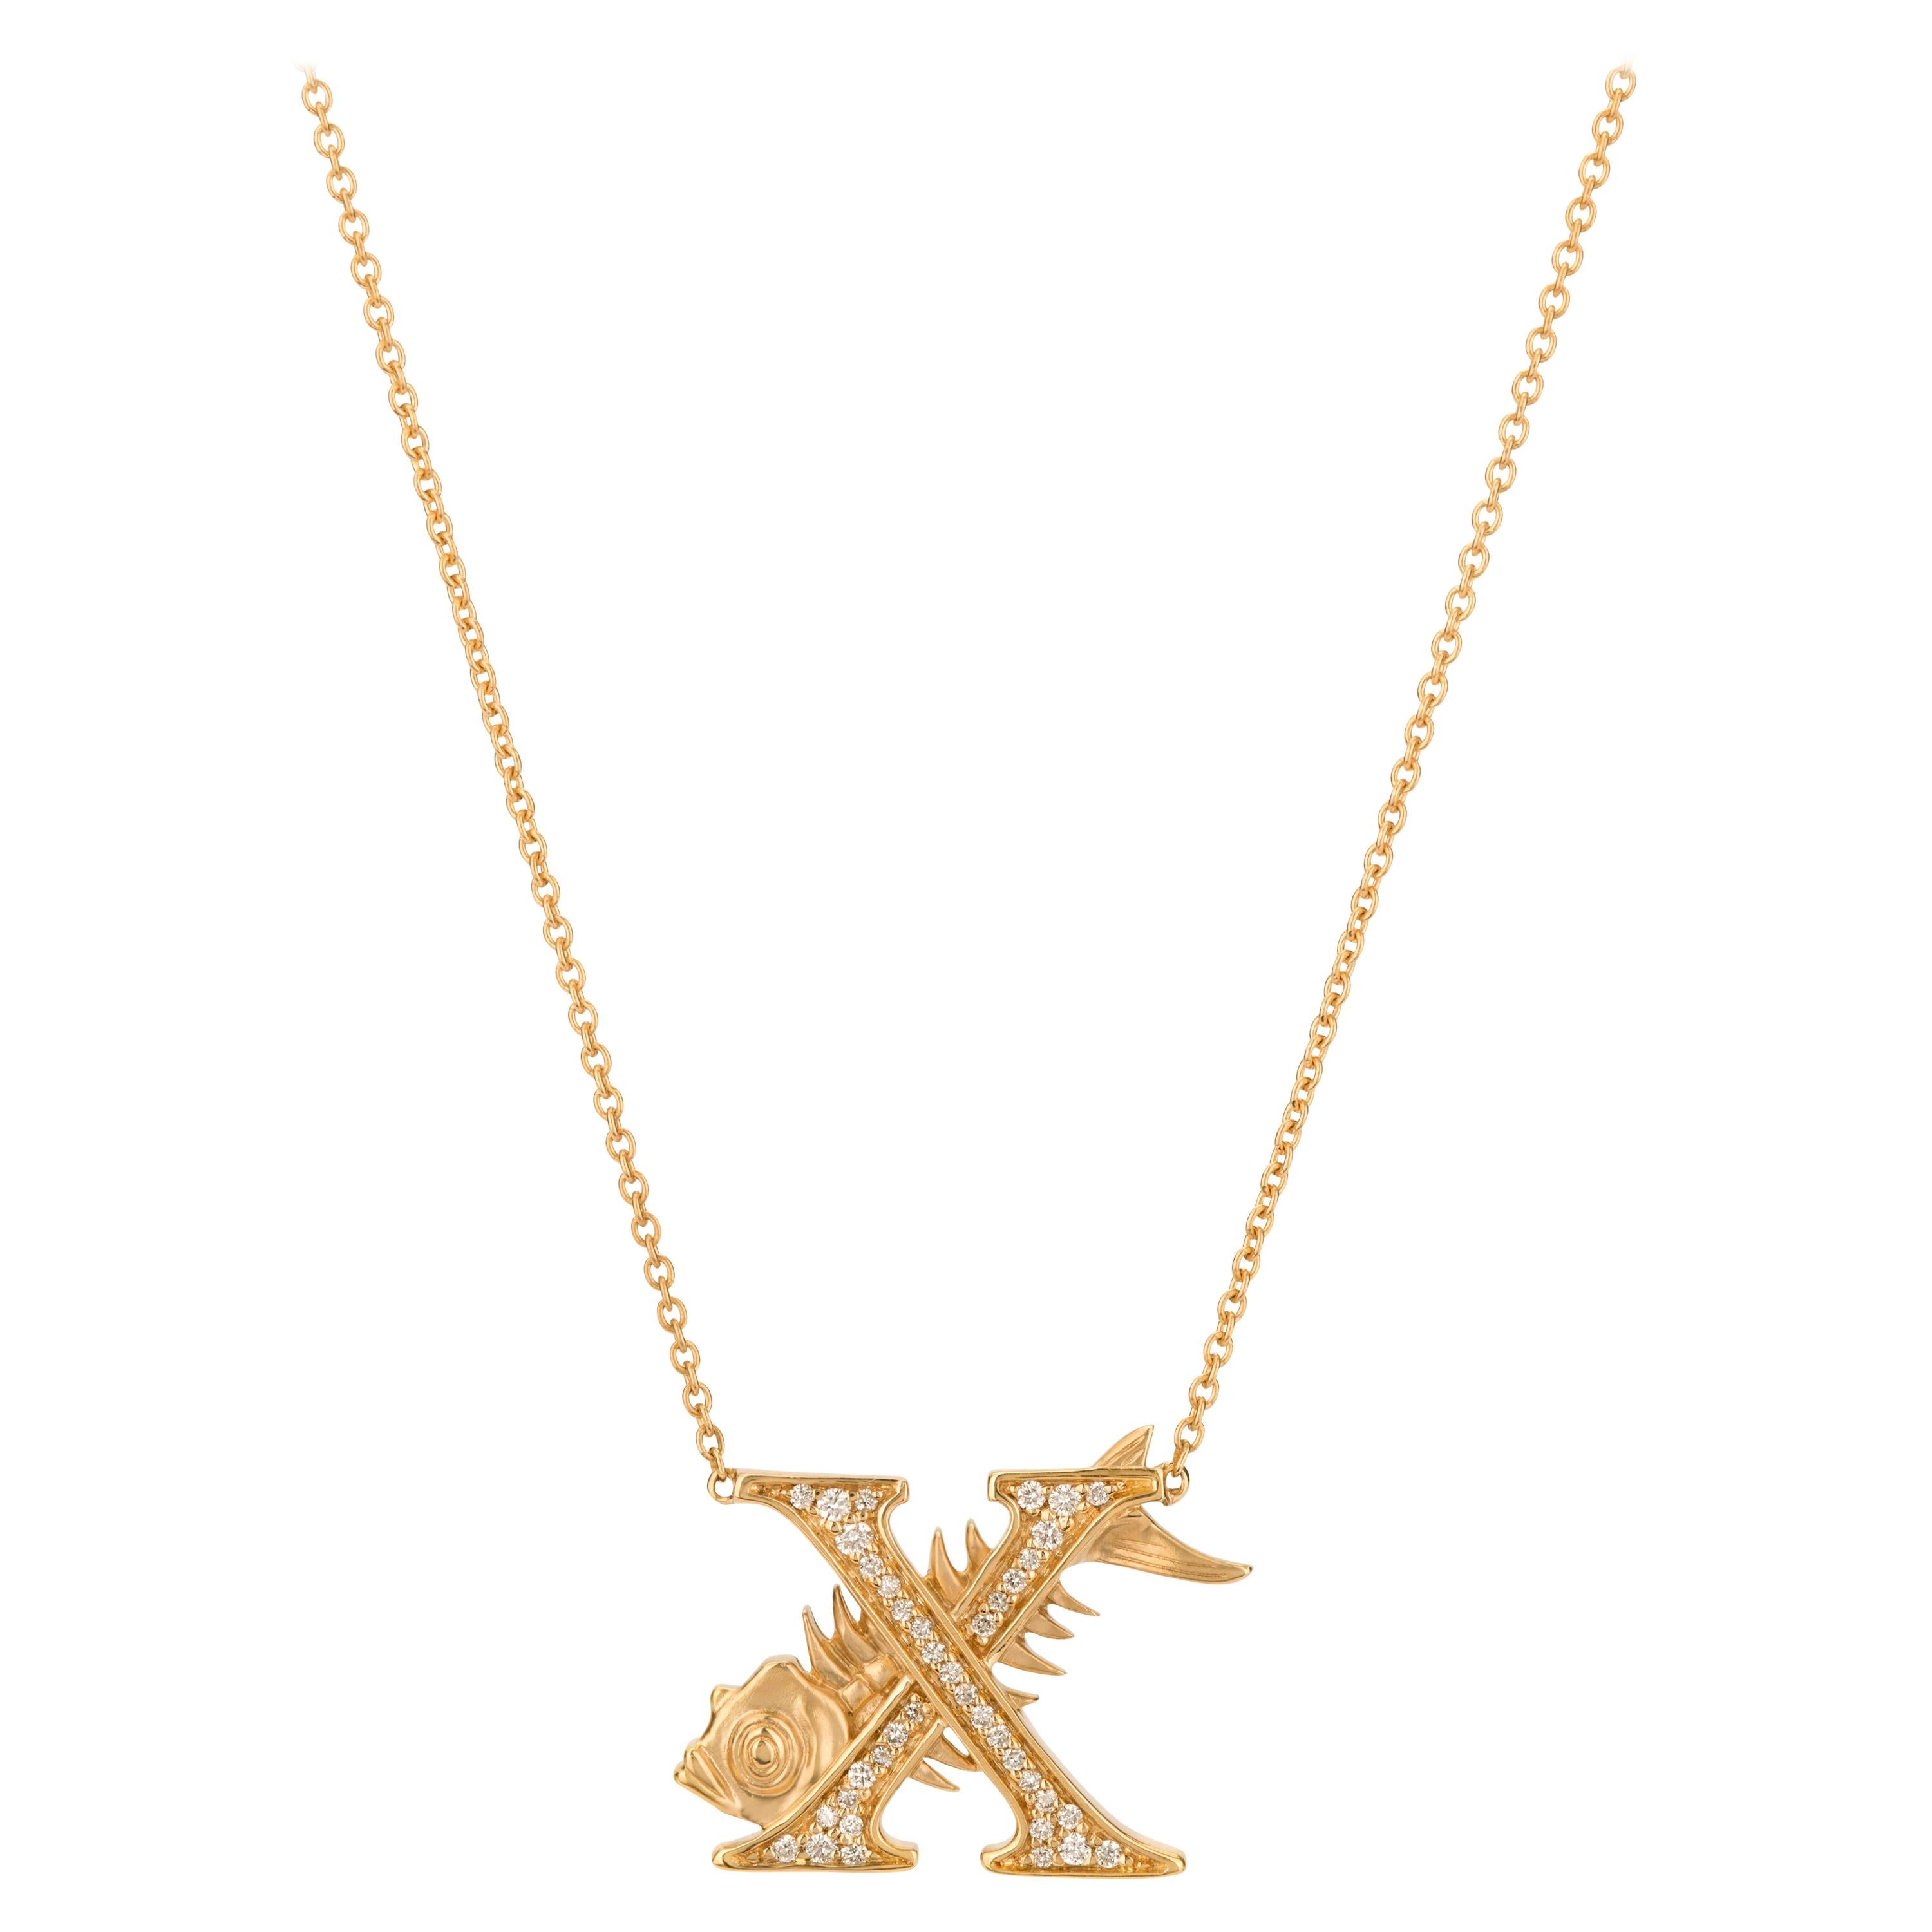 Stephen Webster Fish Tales X is for X-Ray Fish 18K Gold and Diamond Necklace